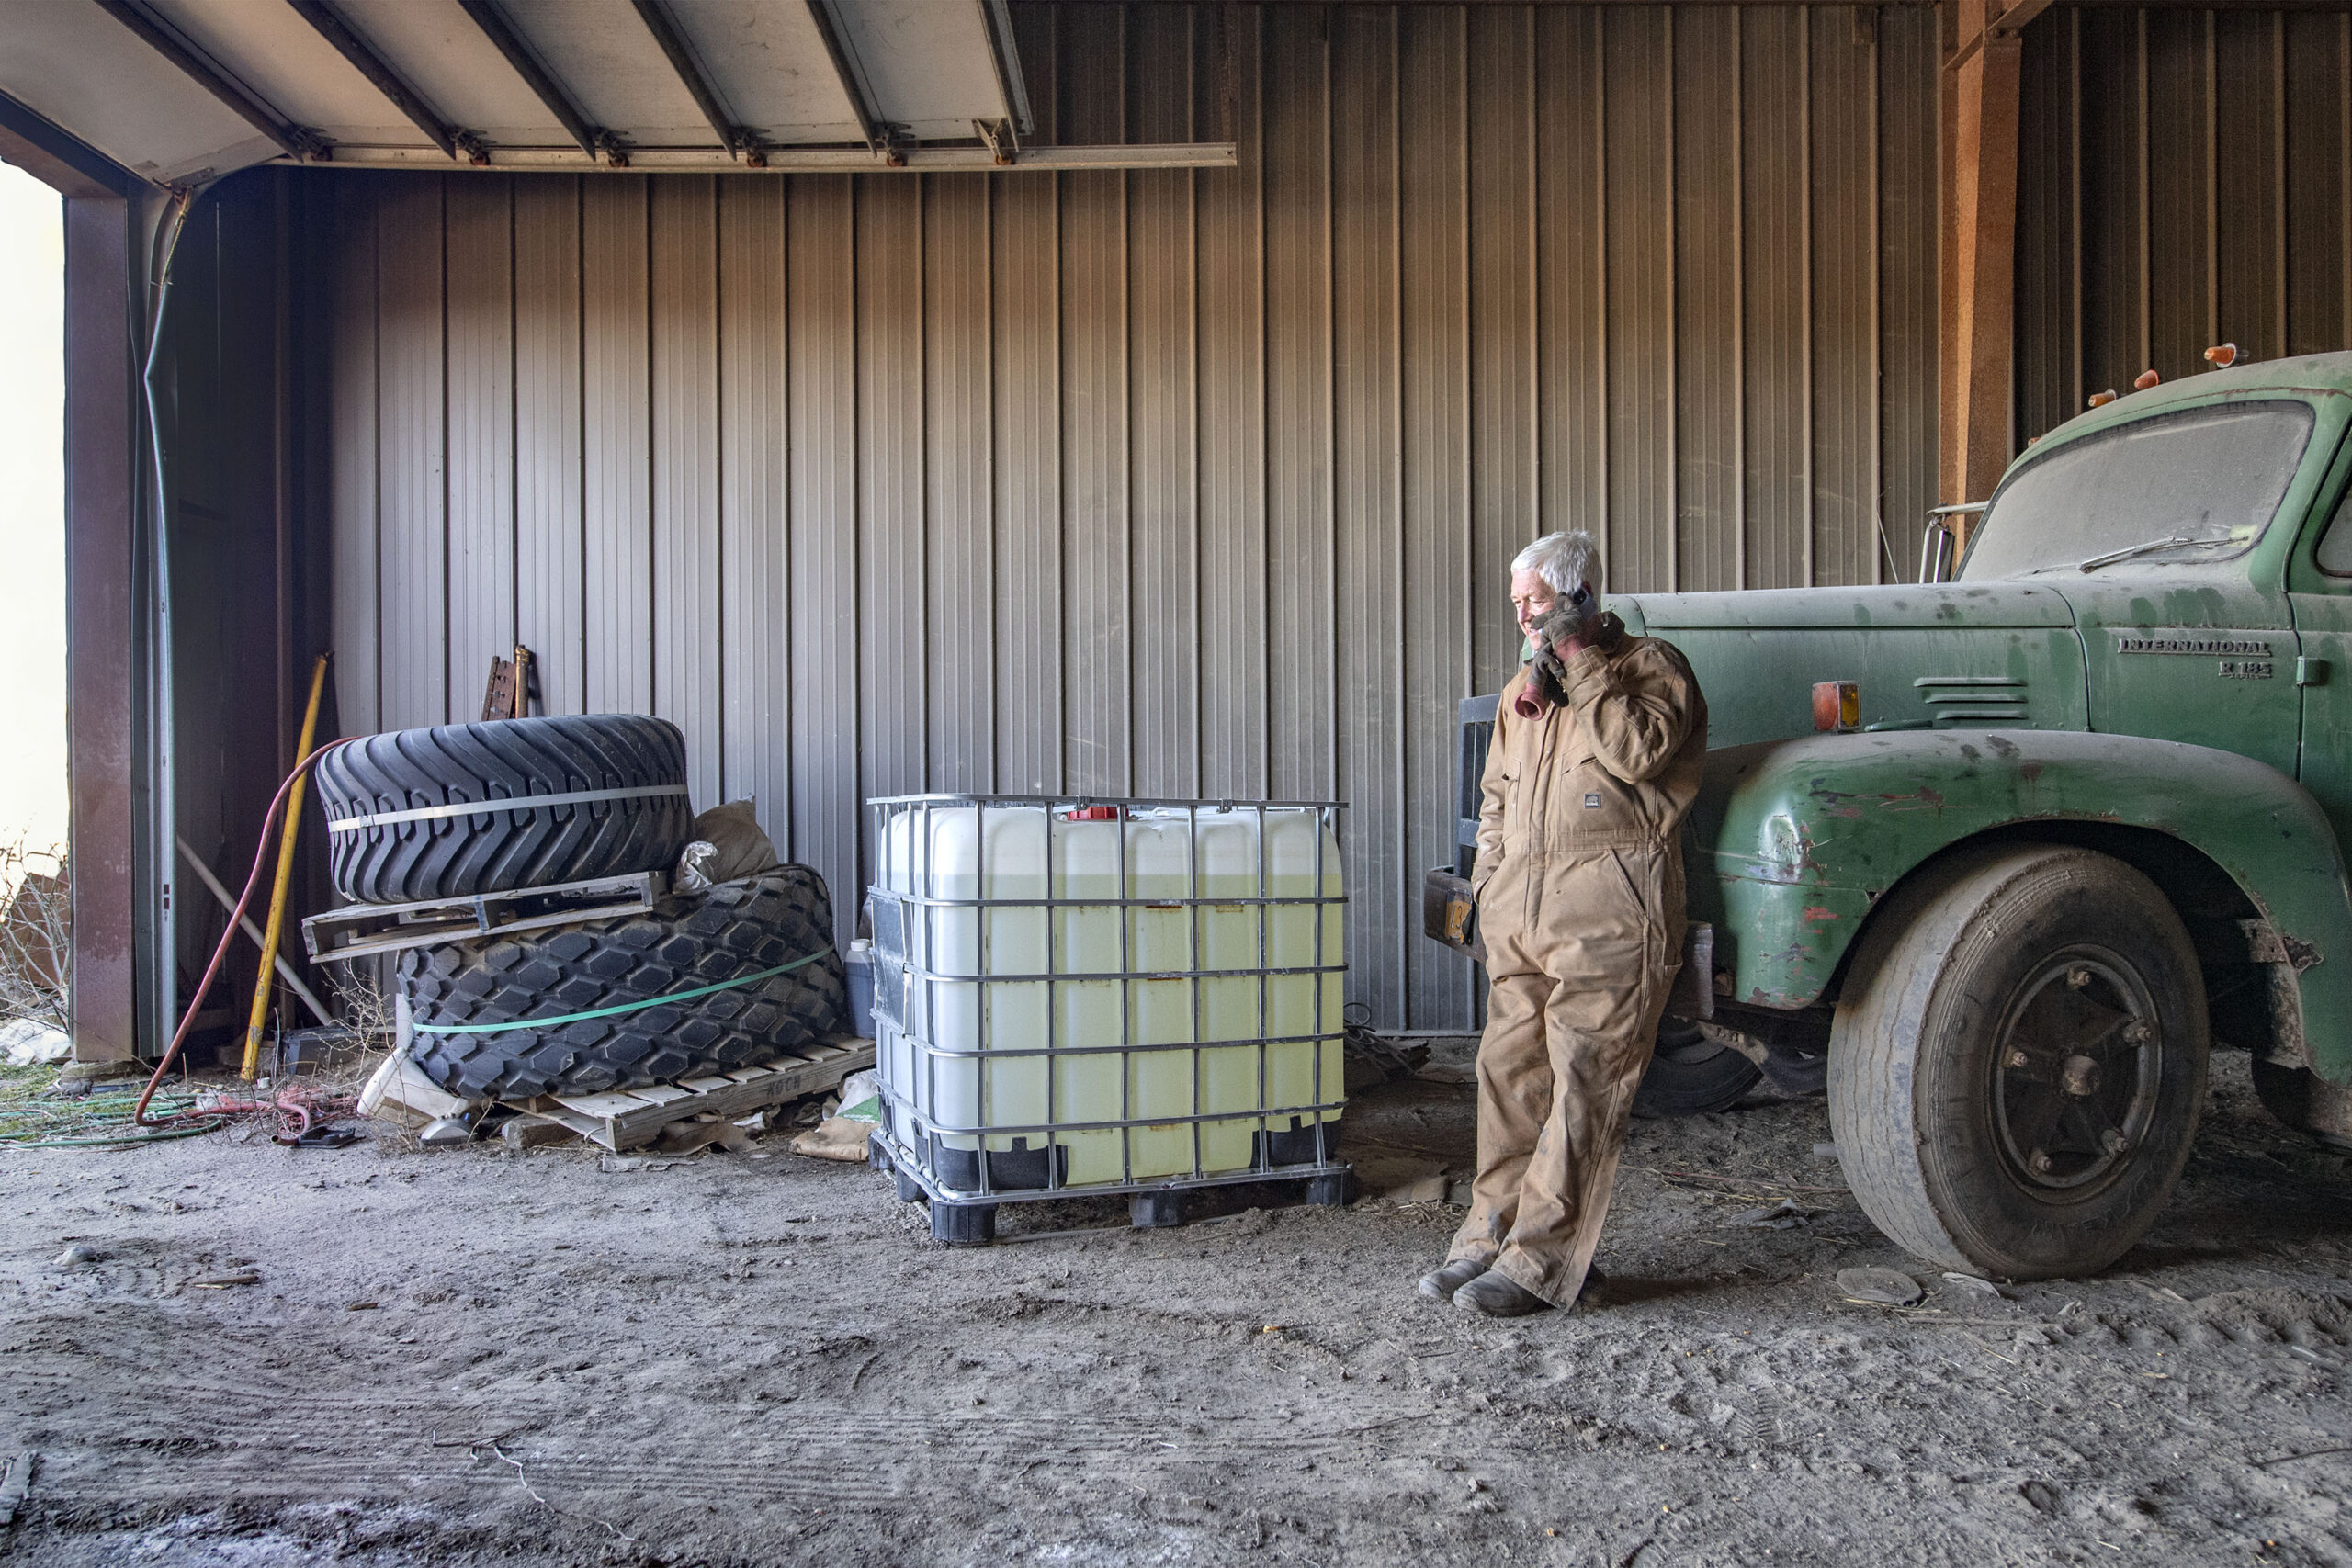 Mecox Bay Dairy Proprietor Art Ludlow makes a phone call in between chores on February 28th, 2022